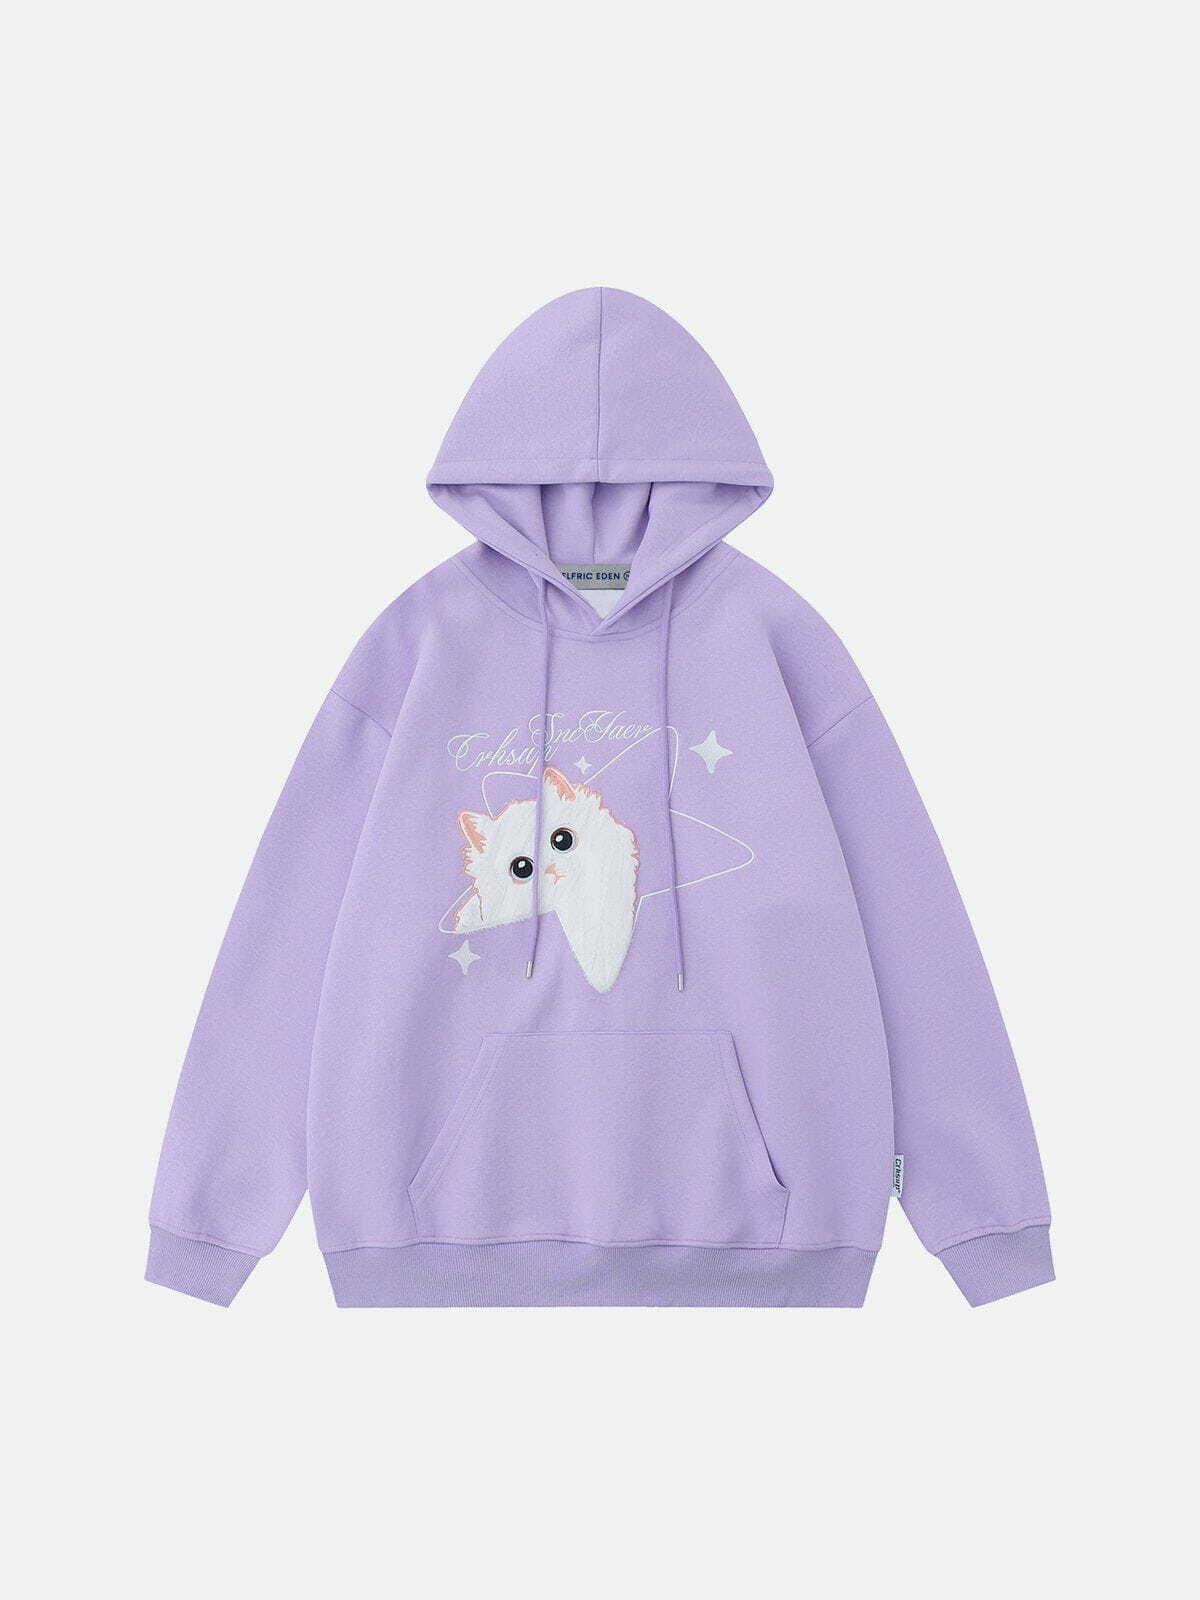 star embroidered cat hoodie edgy streetwear icon 5006